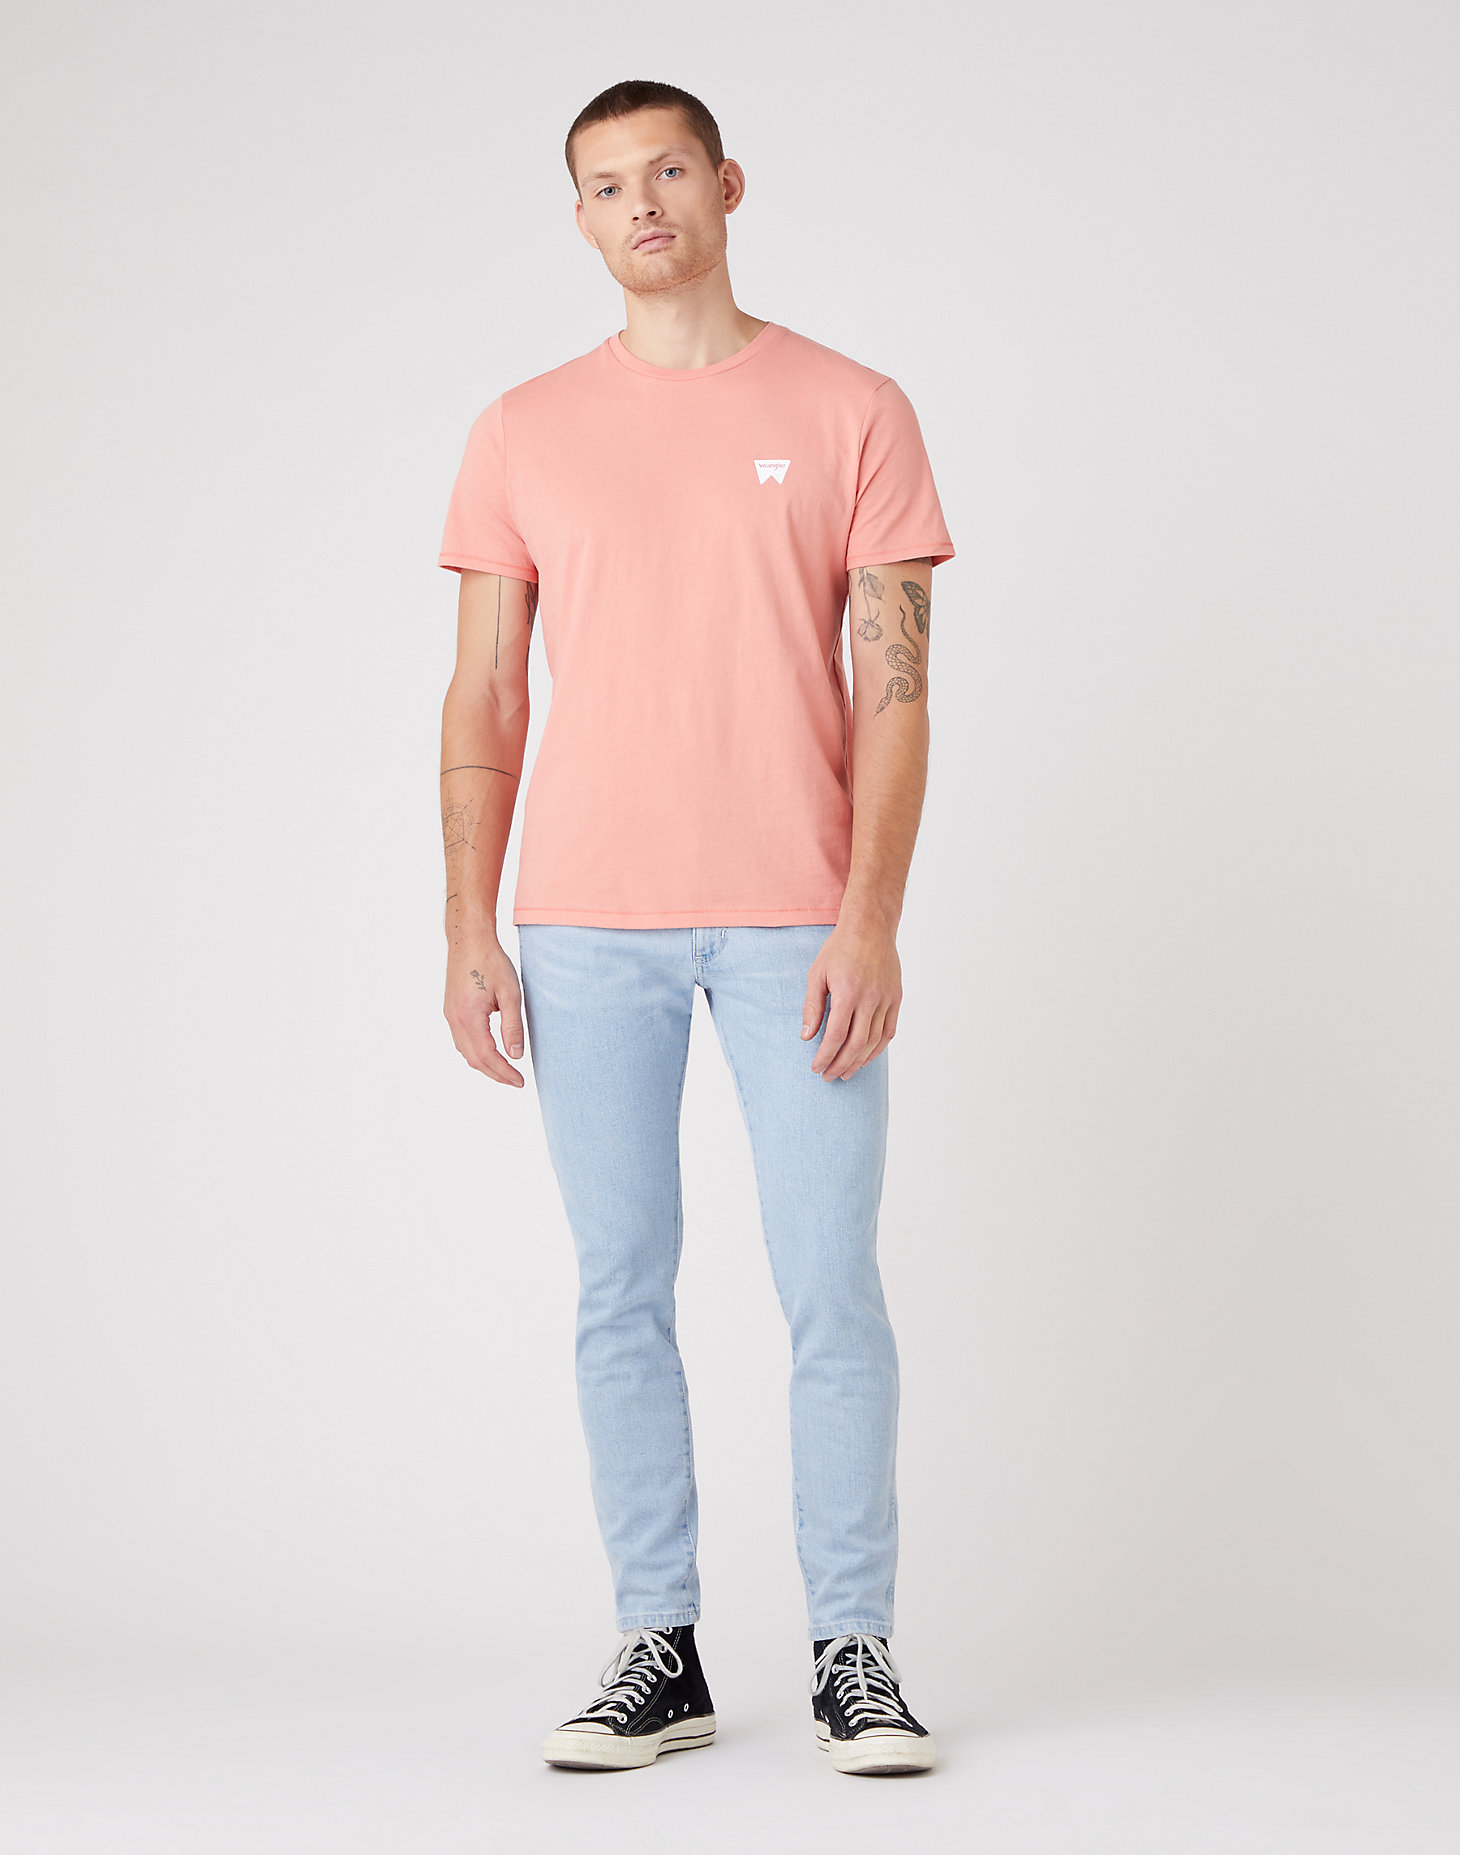 Sign Off Tee in Spiced Coral alternative view 1